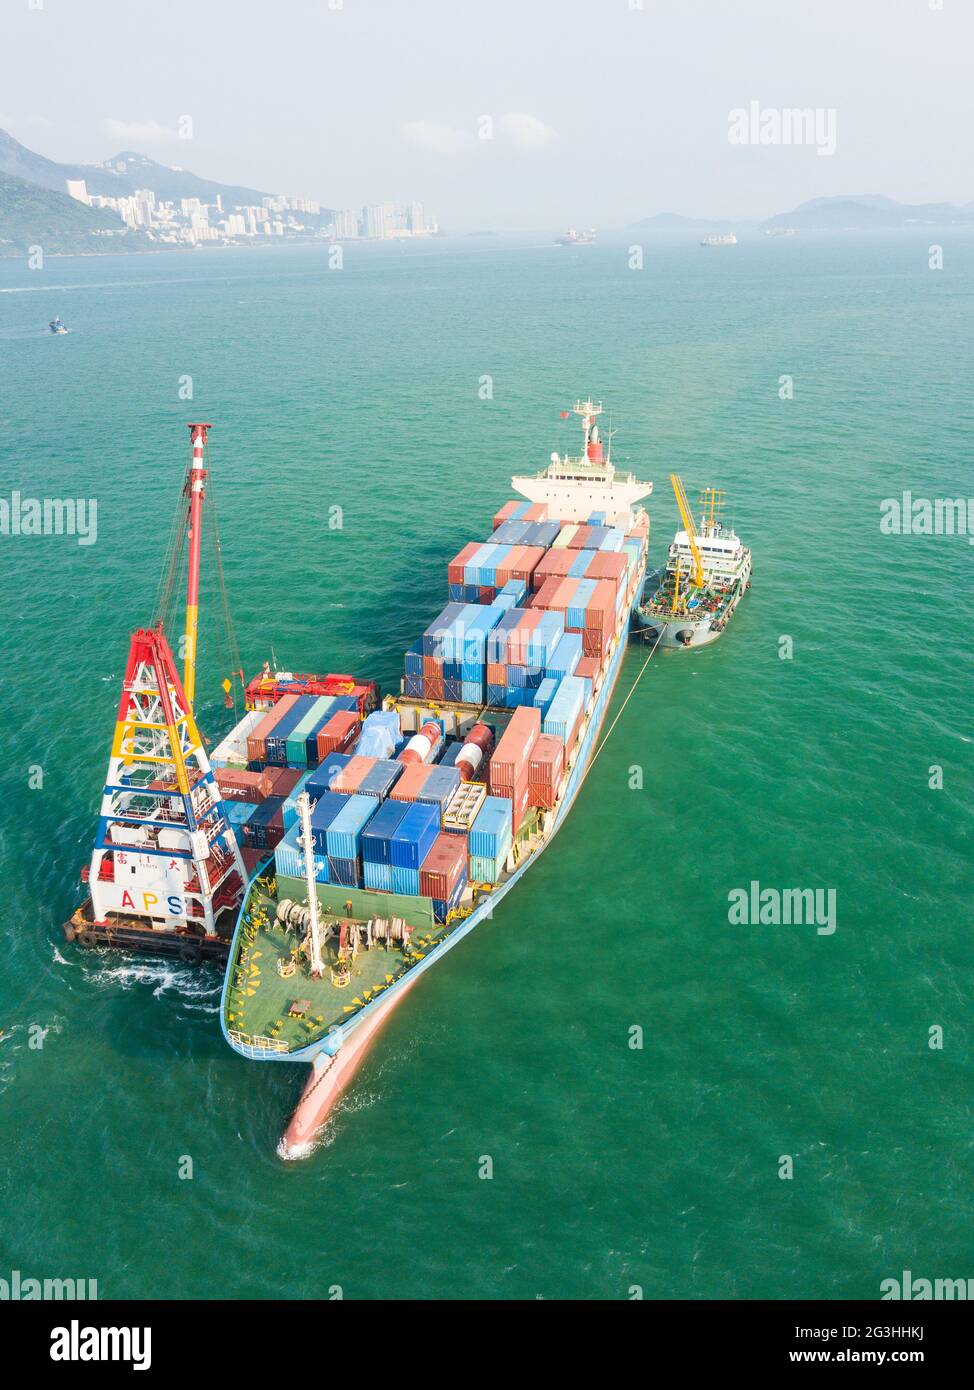 Hong Kong, China, 6 Apr 2019, A container ship is loading containers at sea in Hong Kong. Stock Photo